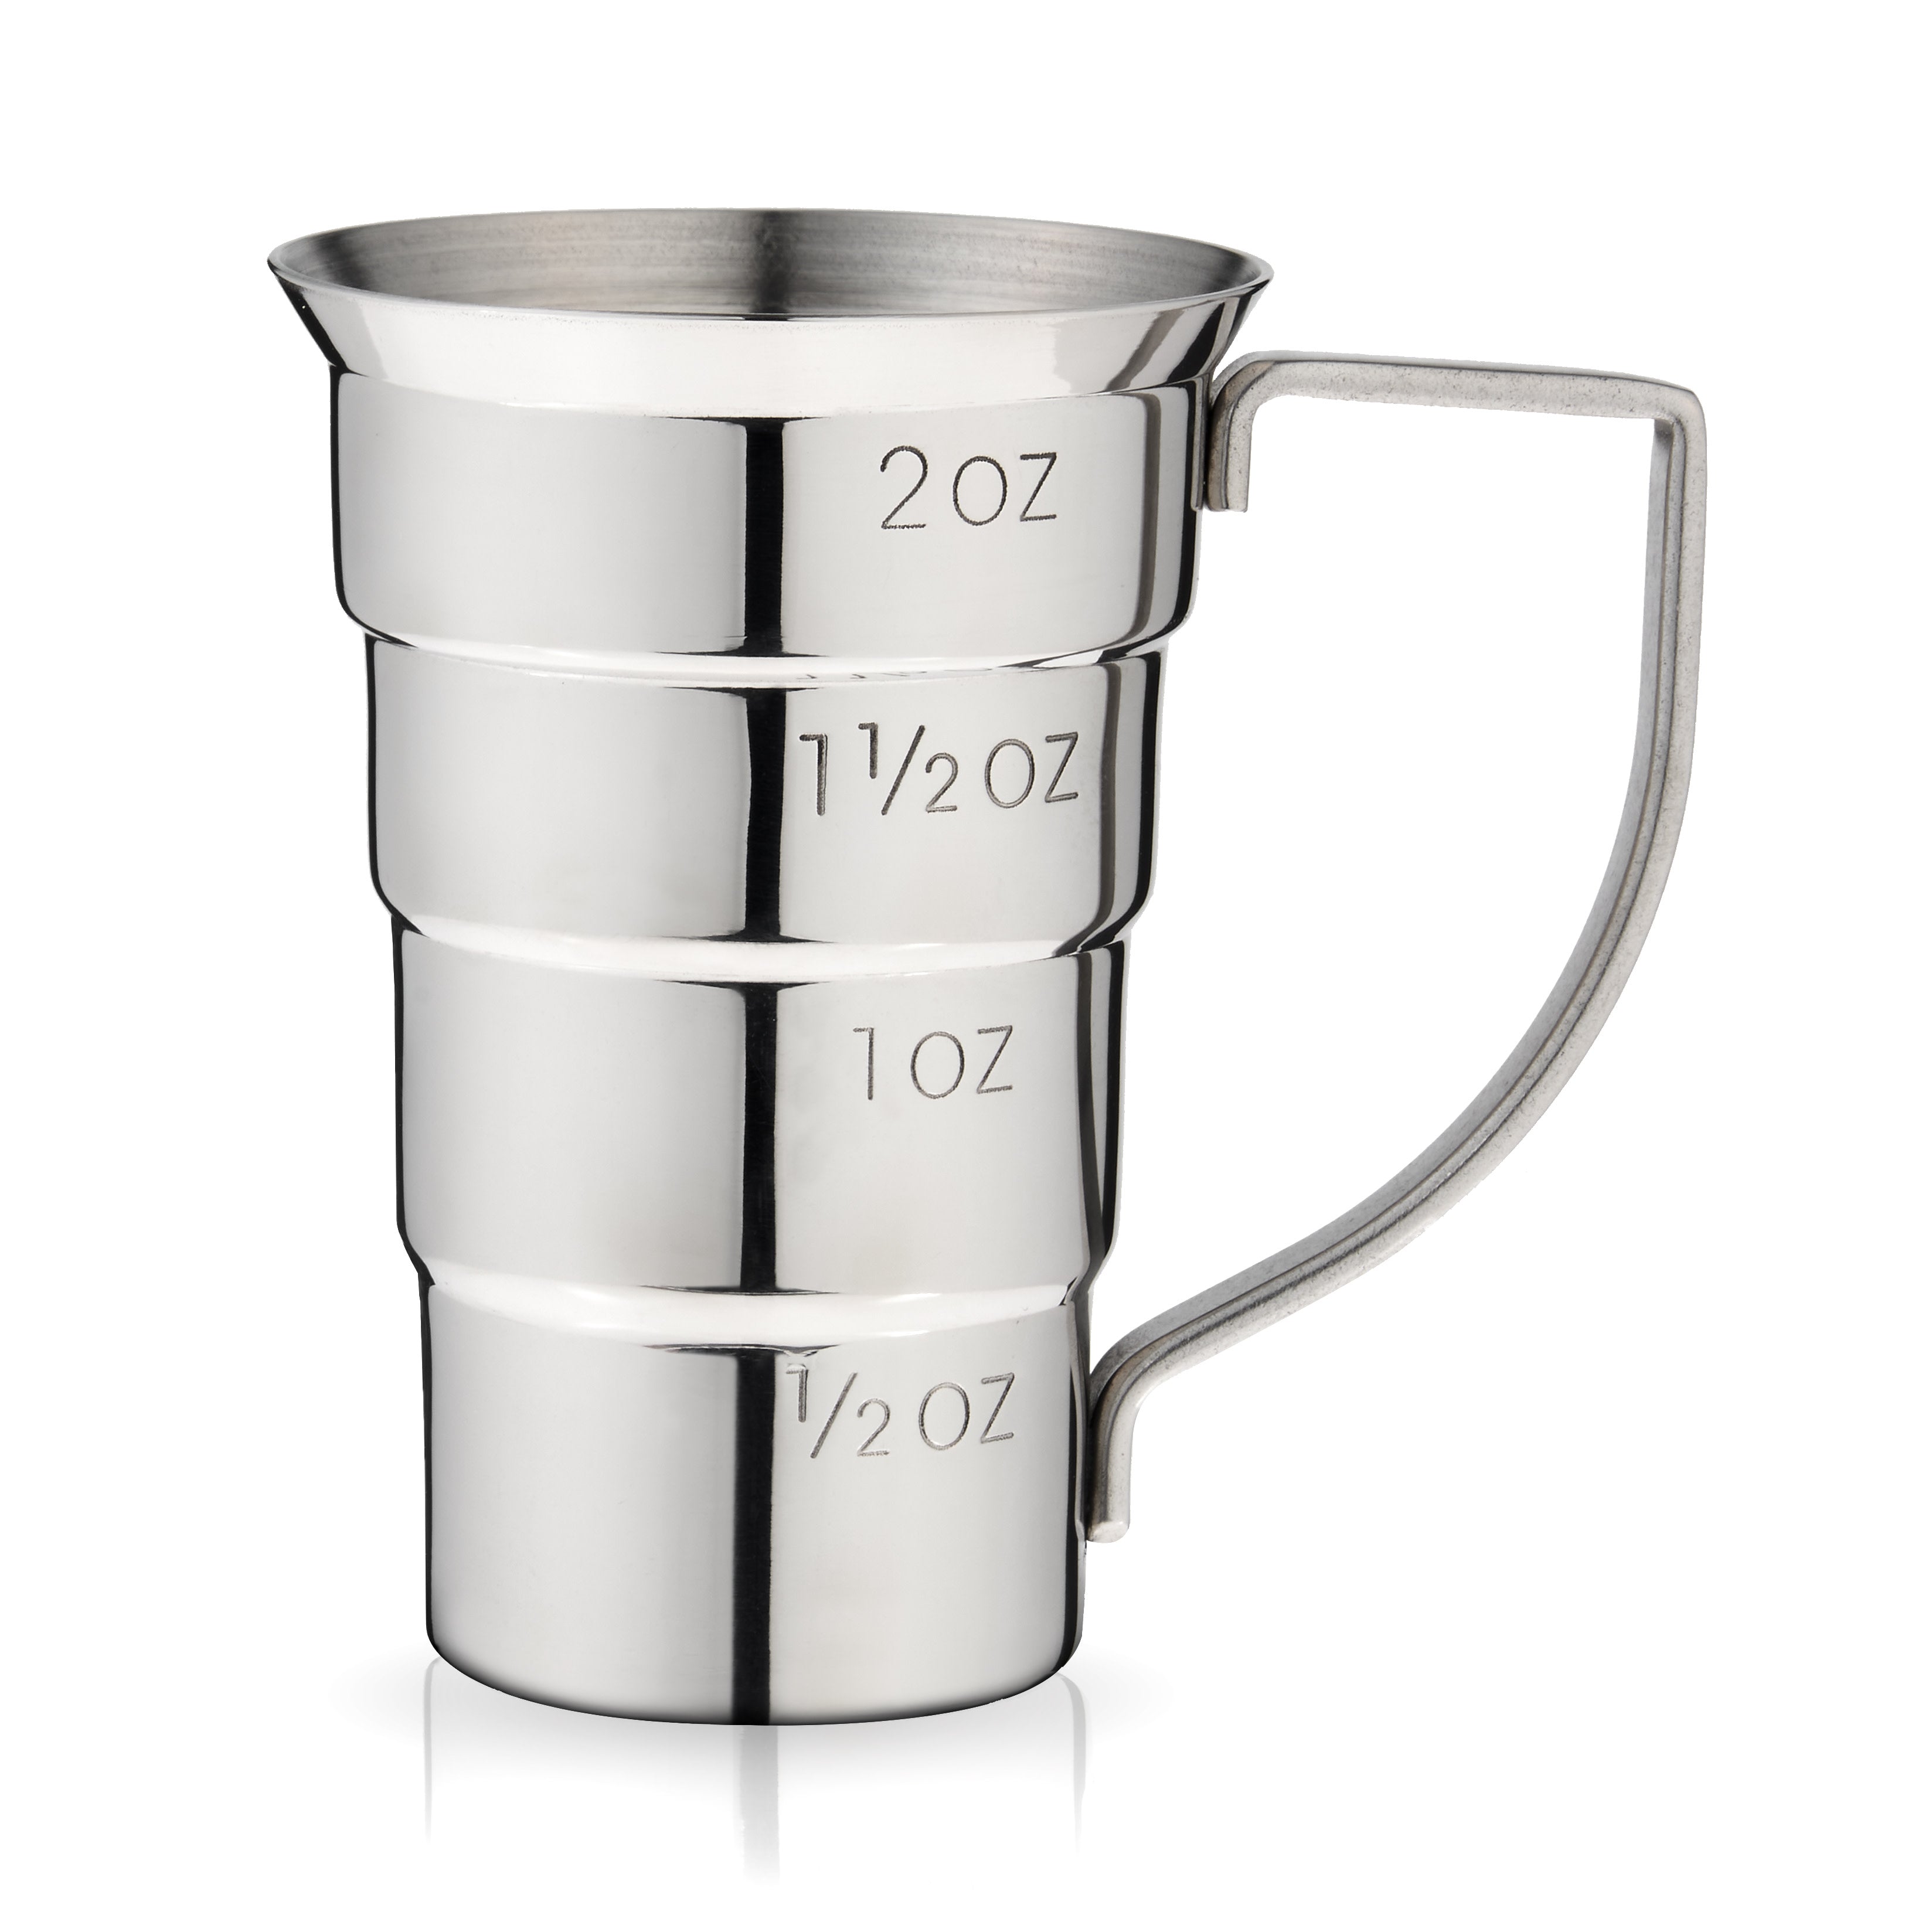 Viski Stepped Jigger With Handle, 4 Measurement Markings, Measuring Cup for  Cocktail Recipes, 0.5 oz, 1 oz, 1.5 oz, & 2 oz, Stainless Steel